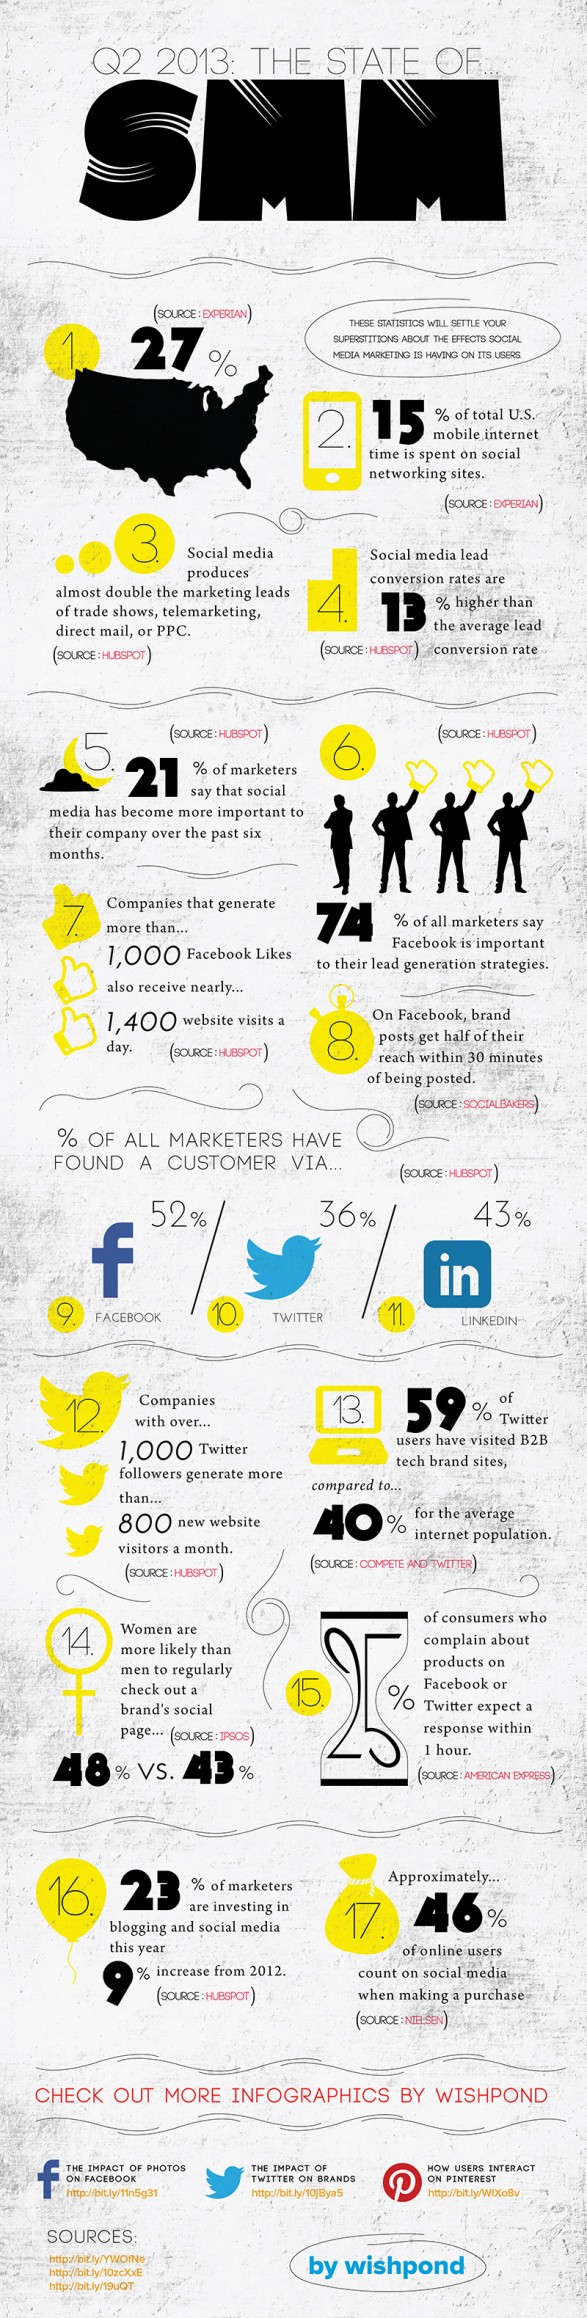 Get the Facts: Social Media Marketing (An Infographic)